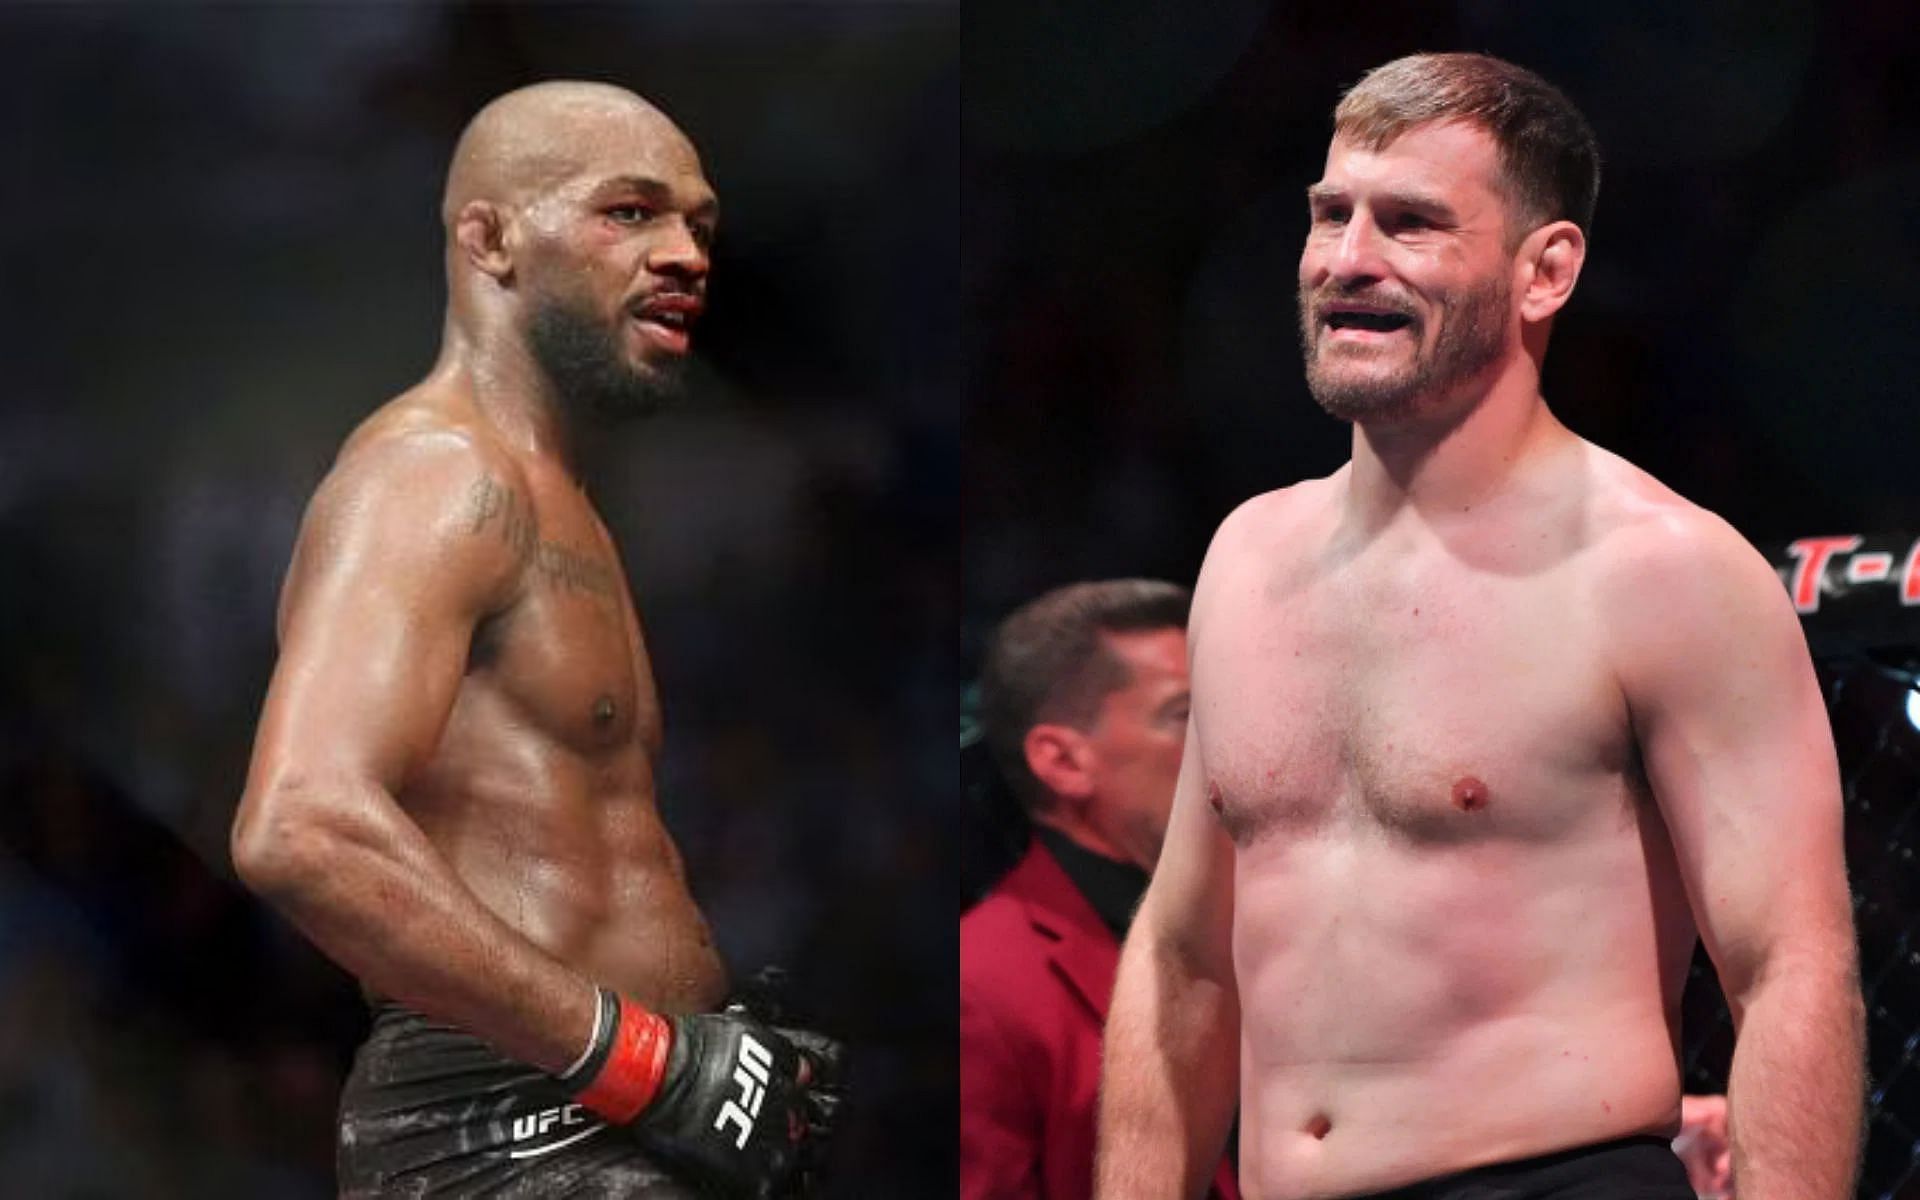  John McCarthy shared his thoughts  how a fight between Jon Jones and Stipe Miocic would go
